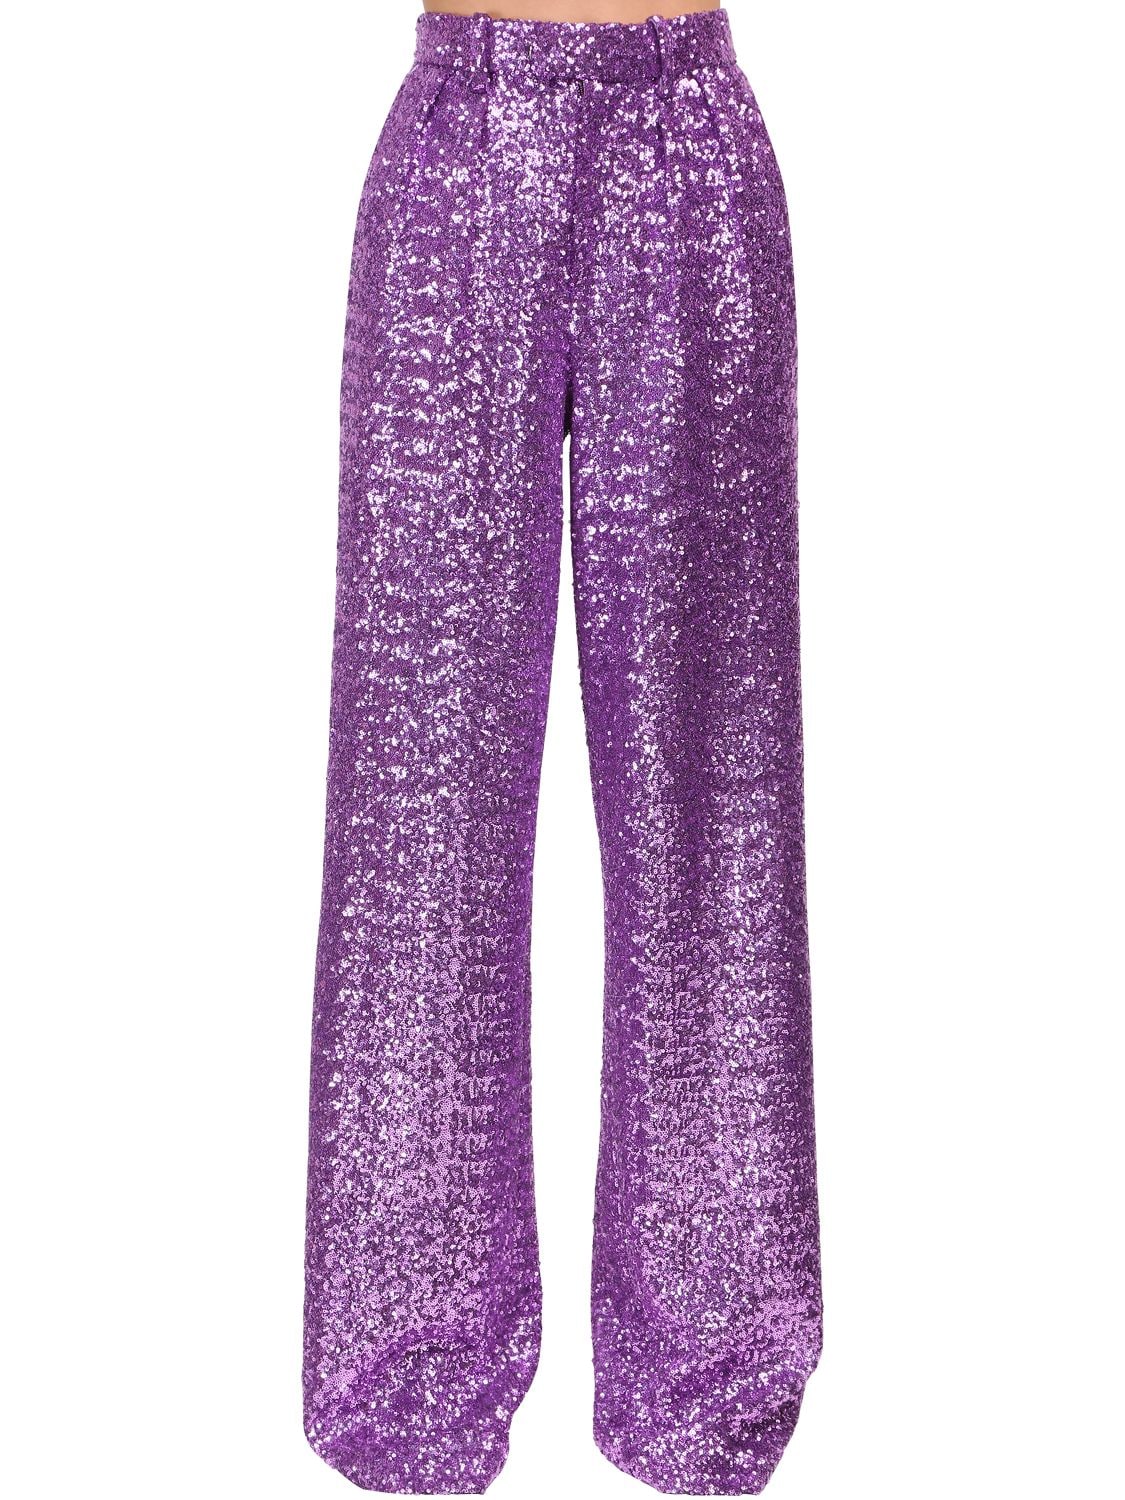 Marc Jacobs High Waist Sequined Pants